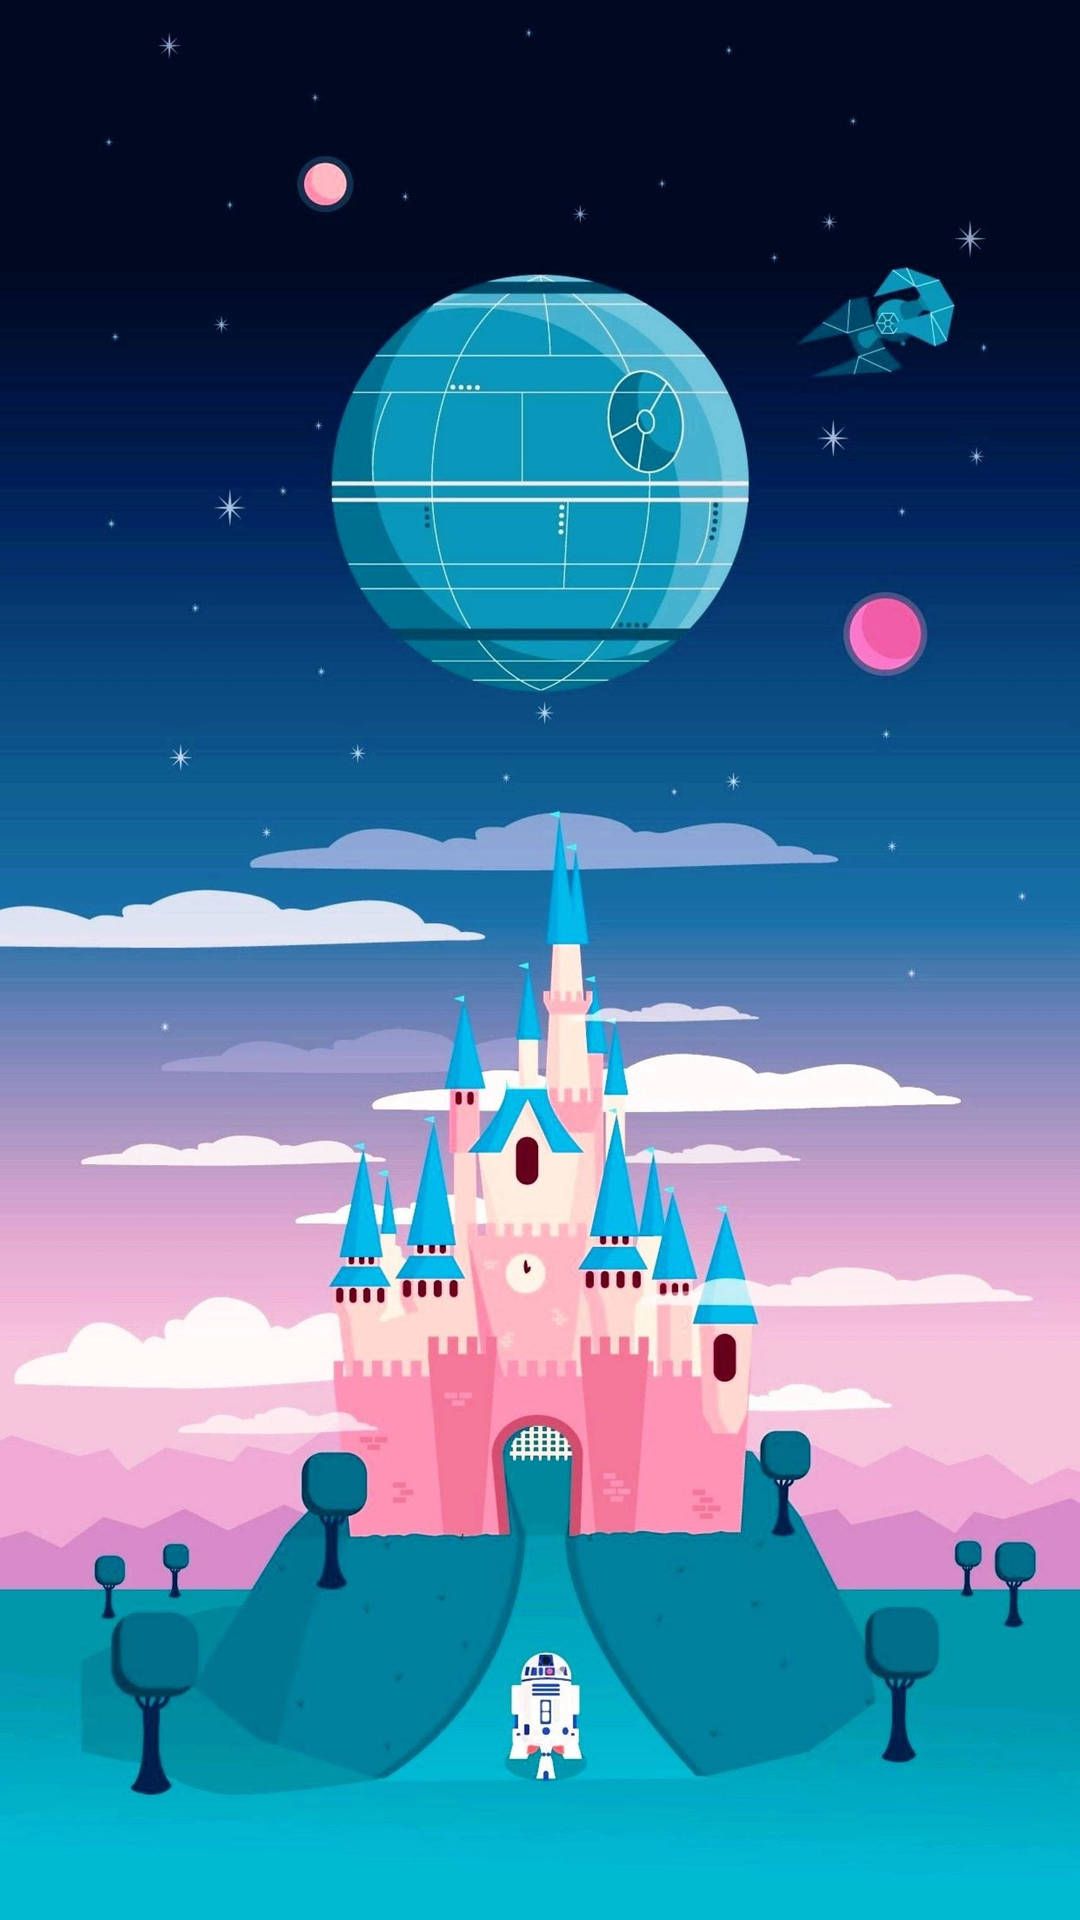 Star Wars iPhone Wallpaper with high-resolution 1080x1920 pixel. You can use this wallpaper for your iPhone 5, 6, 7, 8, X, XS, XR backgrounds, Mobile Screensaver, or iPad Lock Screen - Disney